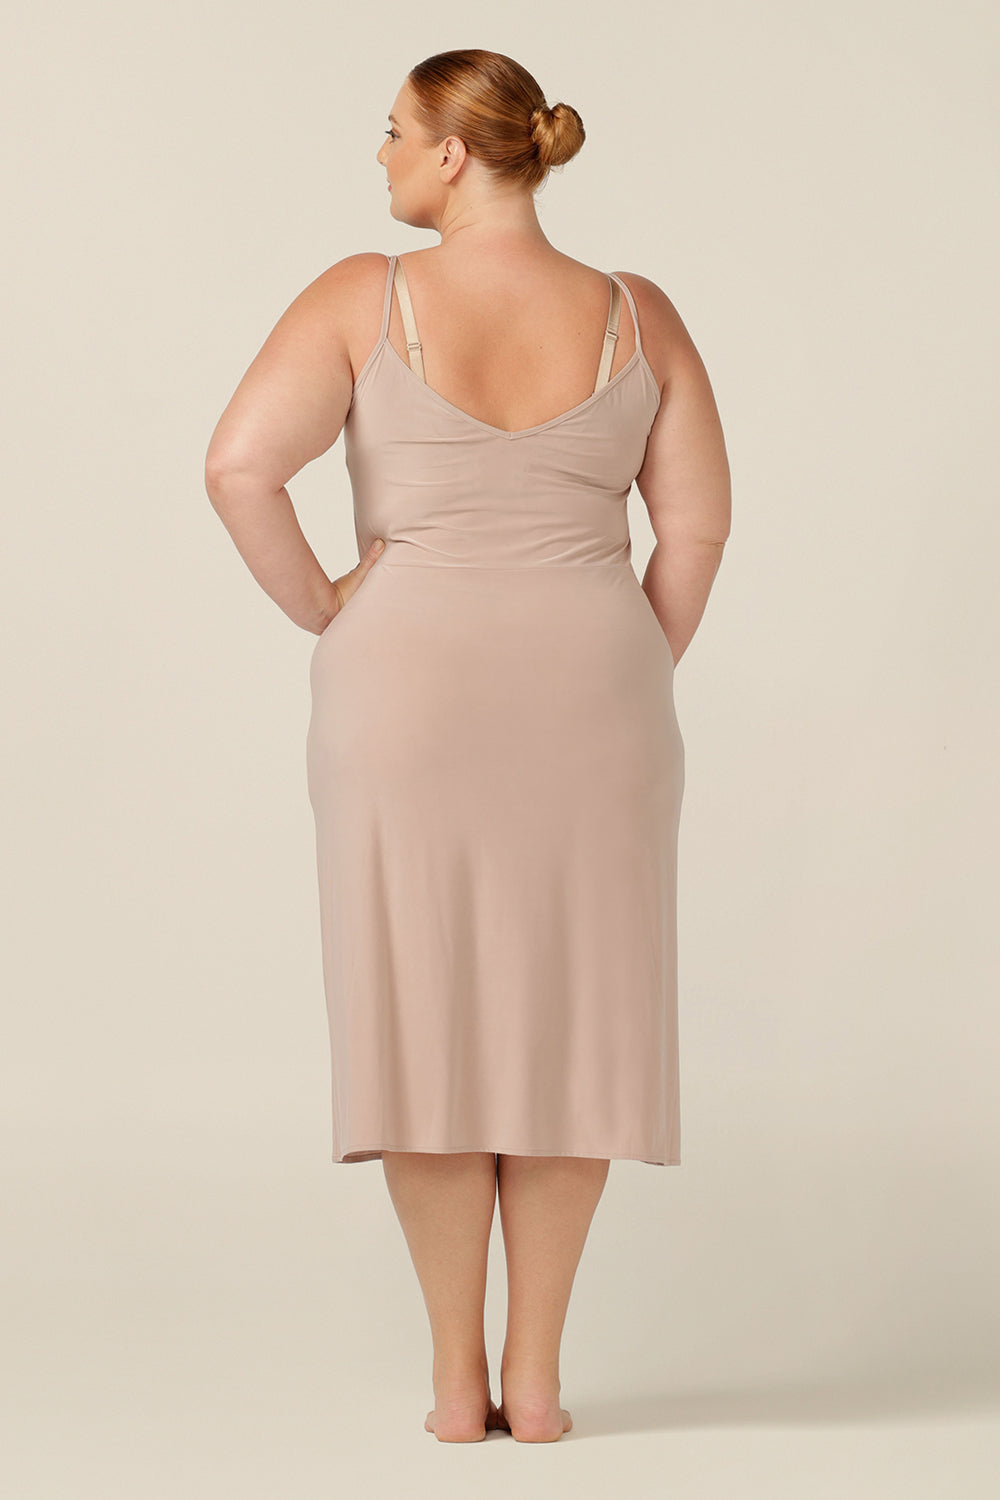 The ultimate smoothing undergarment, this midi-length, reversible, nude jersey slip is made-in-Australia in an inclusive 8 to 24 size range.